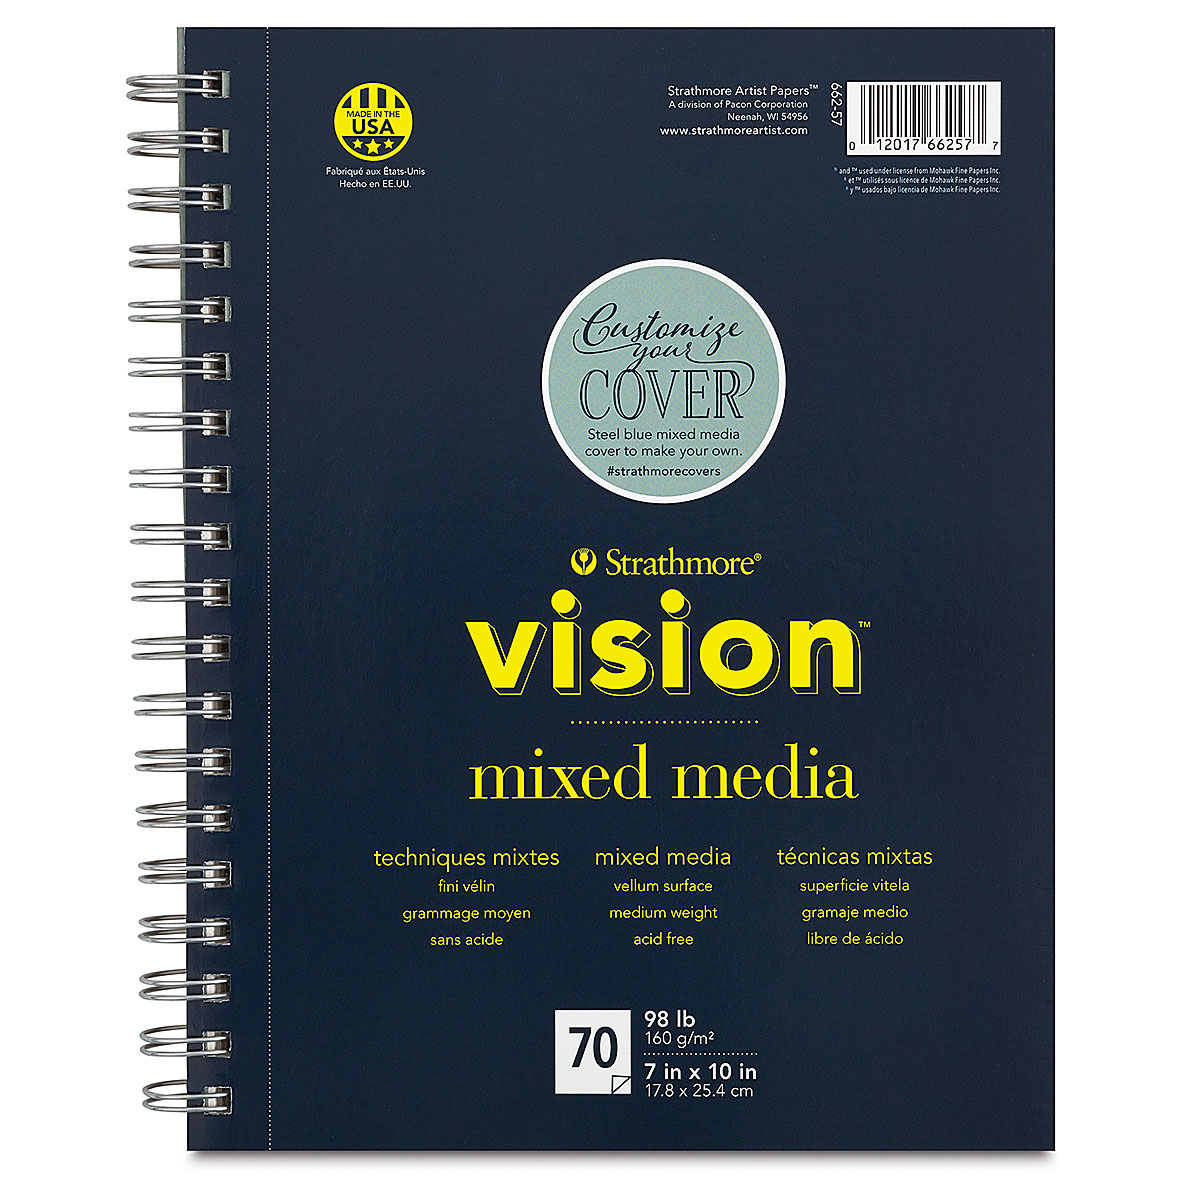 Canson XL Recycled Bristol Paper Pad 9 X12 -25 Sheets, 1 count